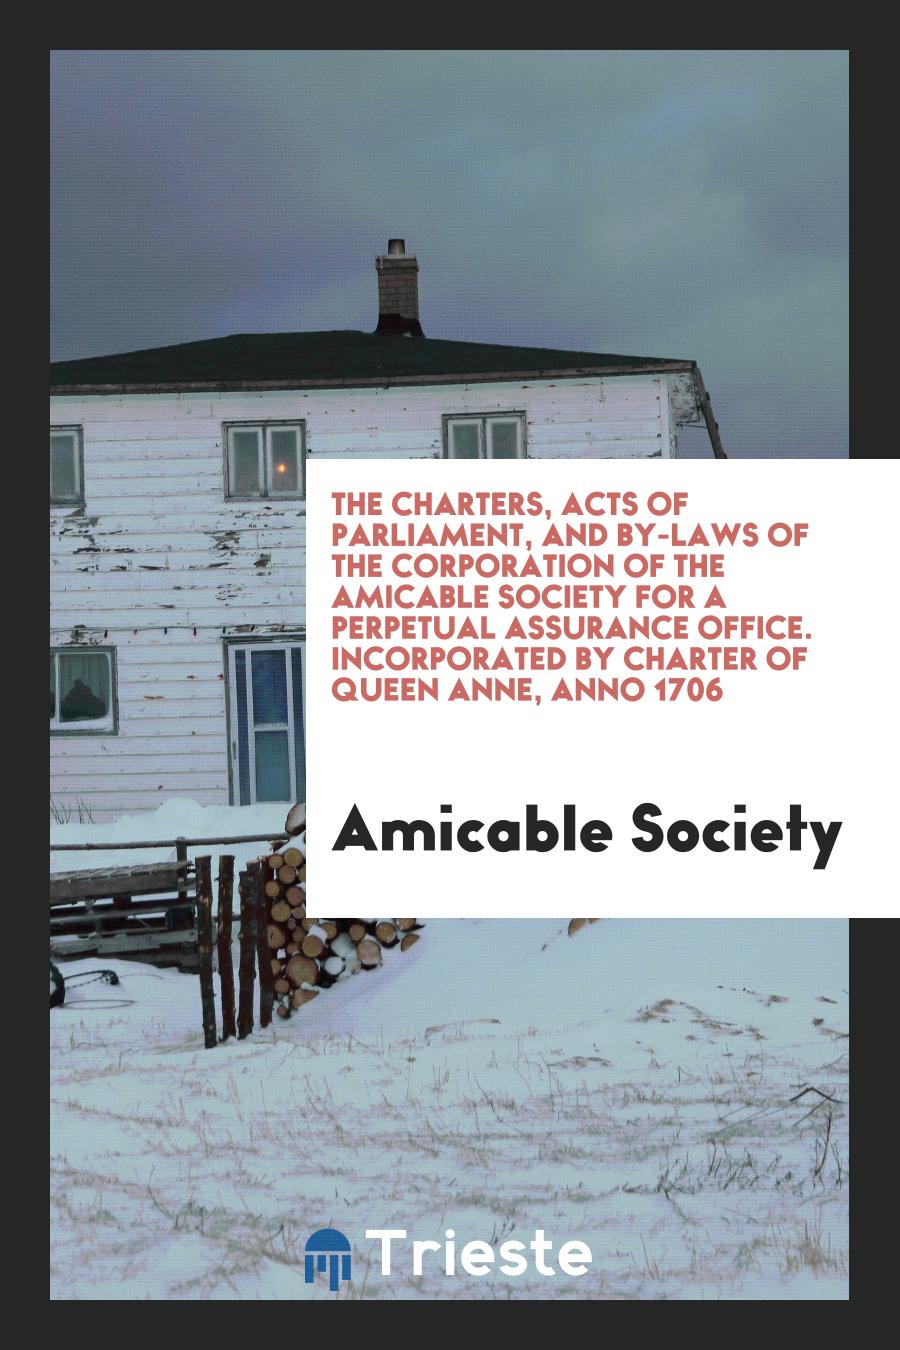 The Charters, Acts of Parliament, and By-Laws of the Corporation of the Amicable Society for a Perpetual Assurance Office. Incorporated by Charter of Queen Anne, Anno 1706